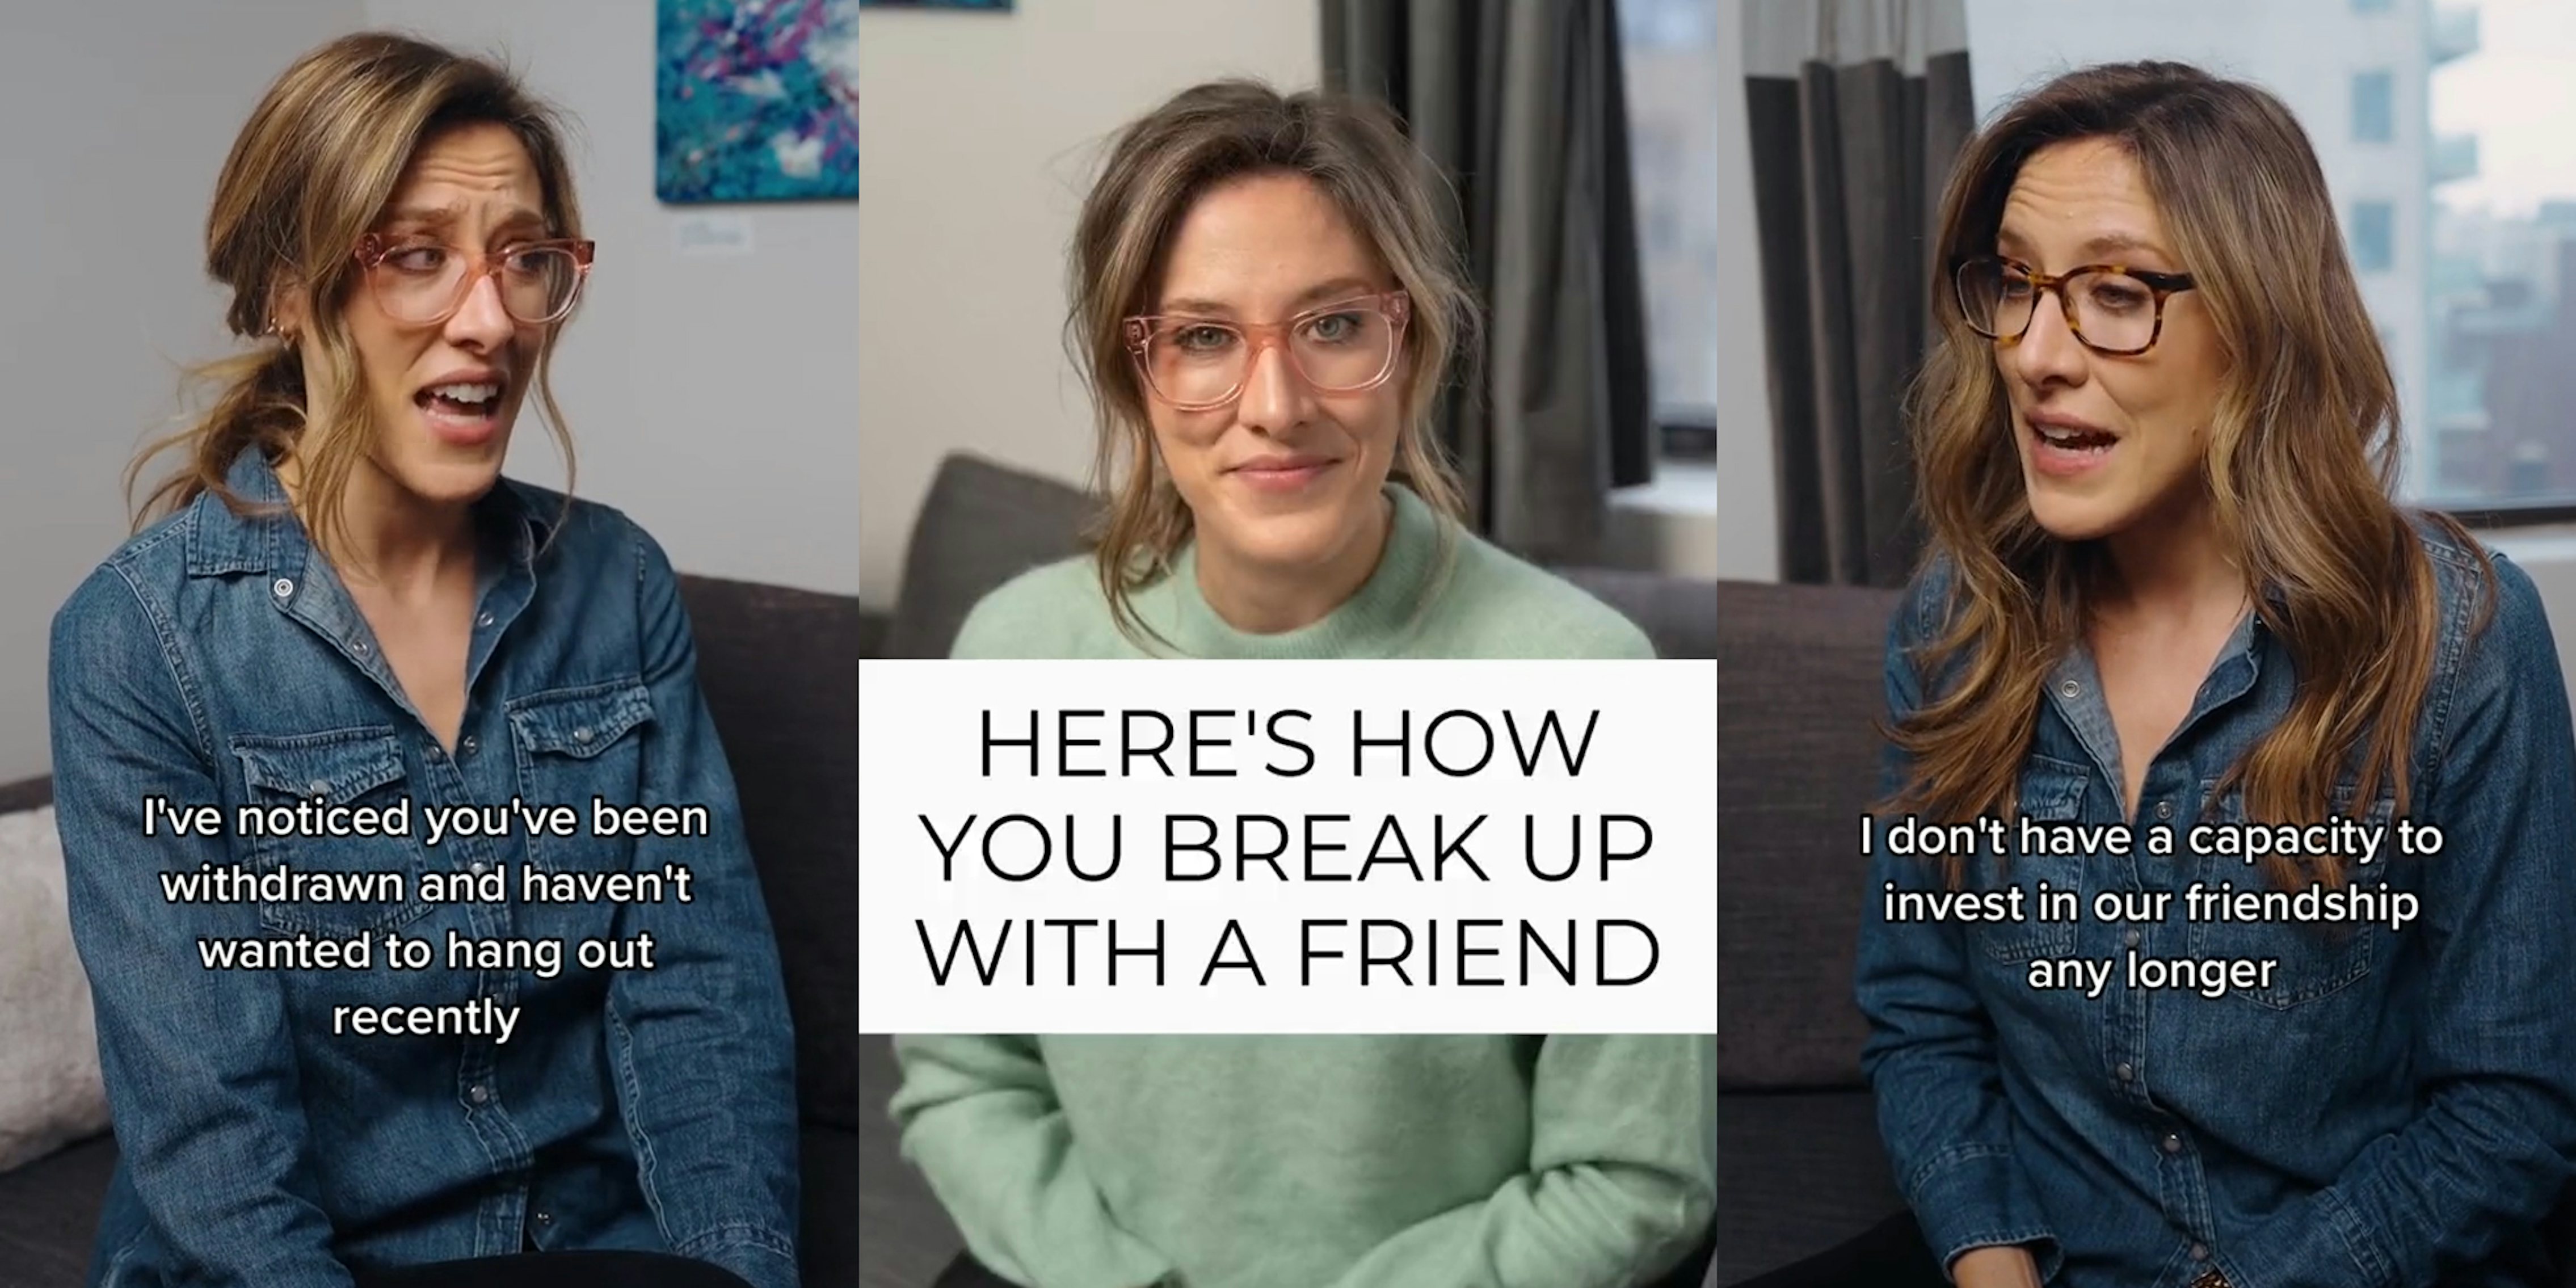 woman speaking on couch with caption 'I've noticed you've been withdrawn and haven't wanted to hang out recently' (l) woman speaking on couch with caption 'HERE'S HOW YOU BREAK UP WITH A FRIEND' (c) woman speaking on couch with caption 'I don't have a capacity to invest in our friendship any longer' (r)